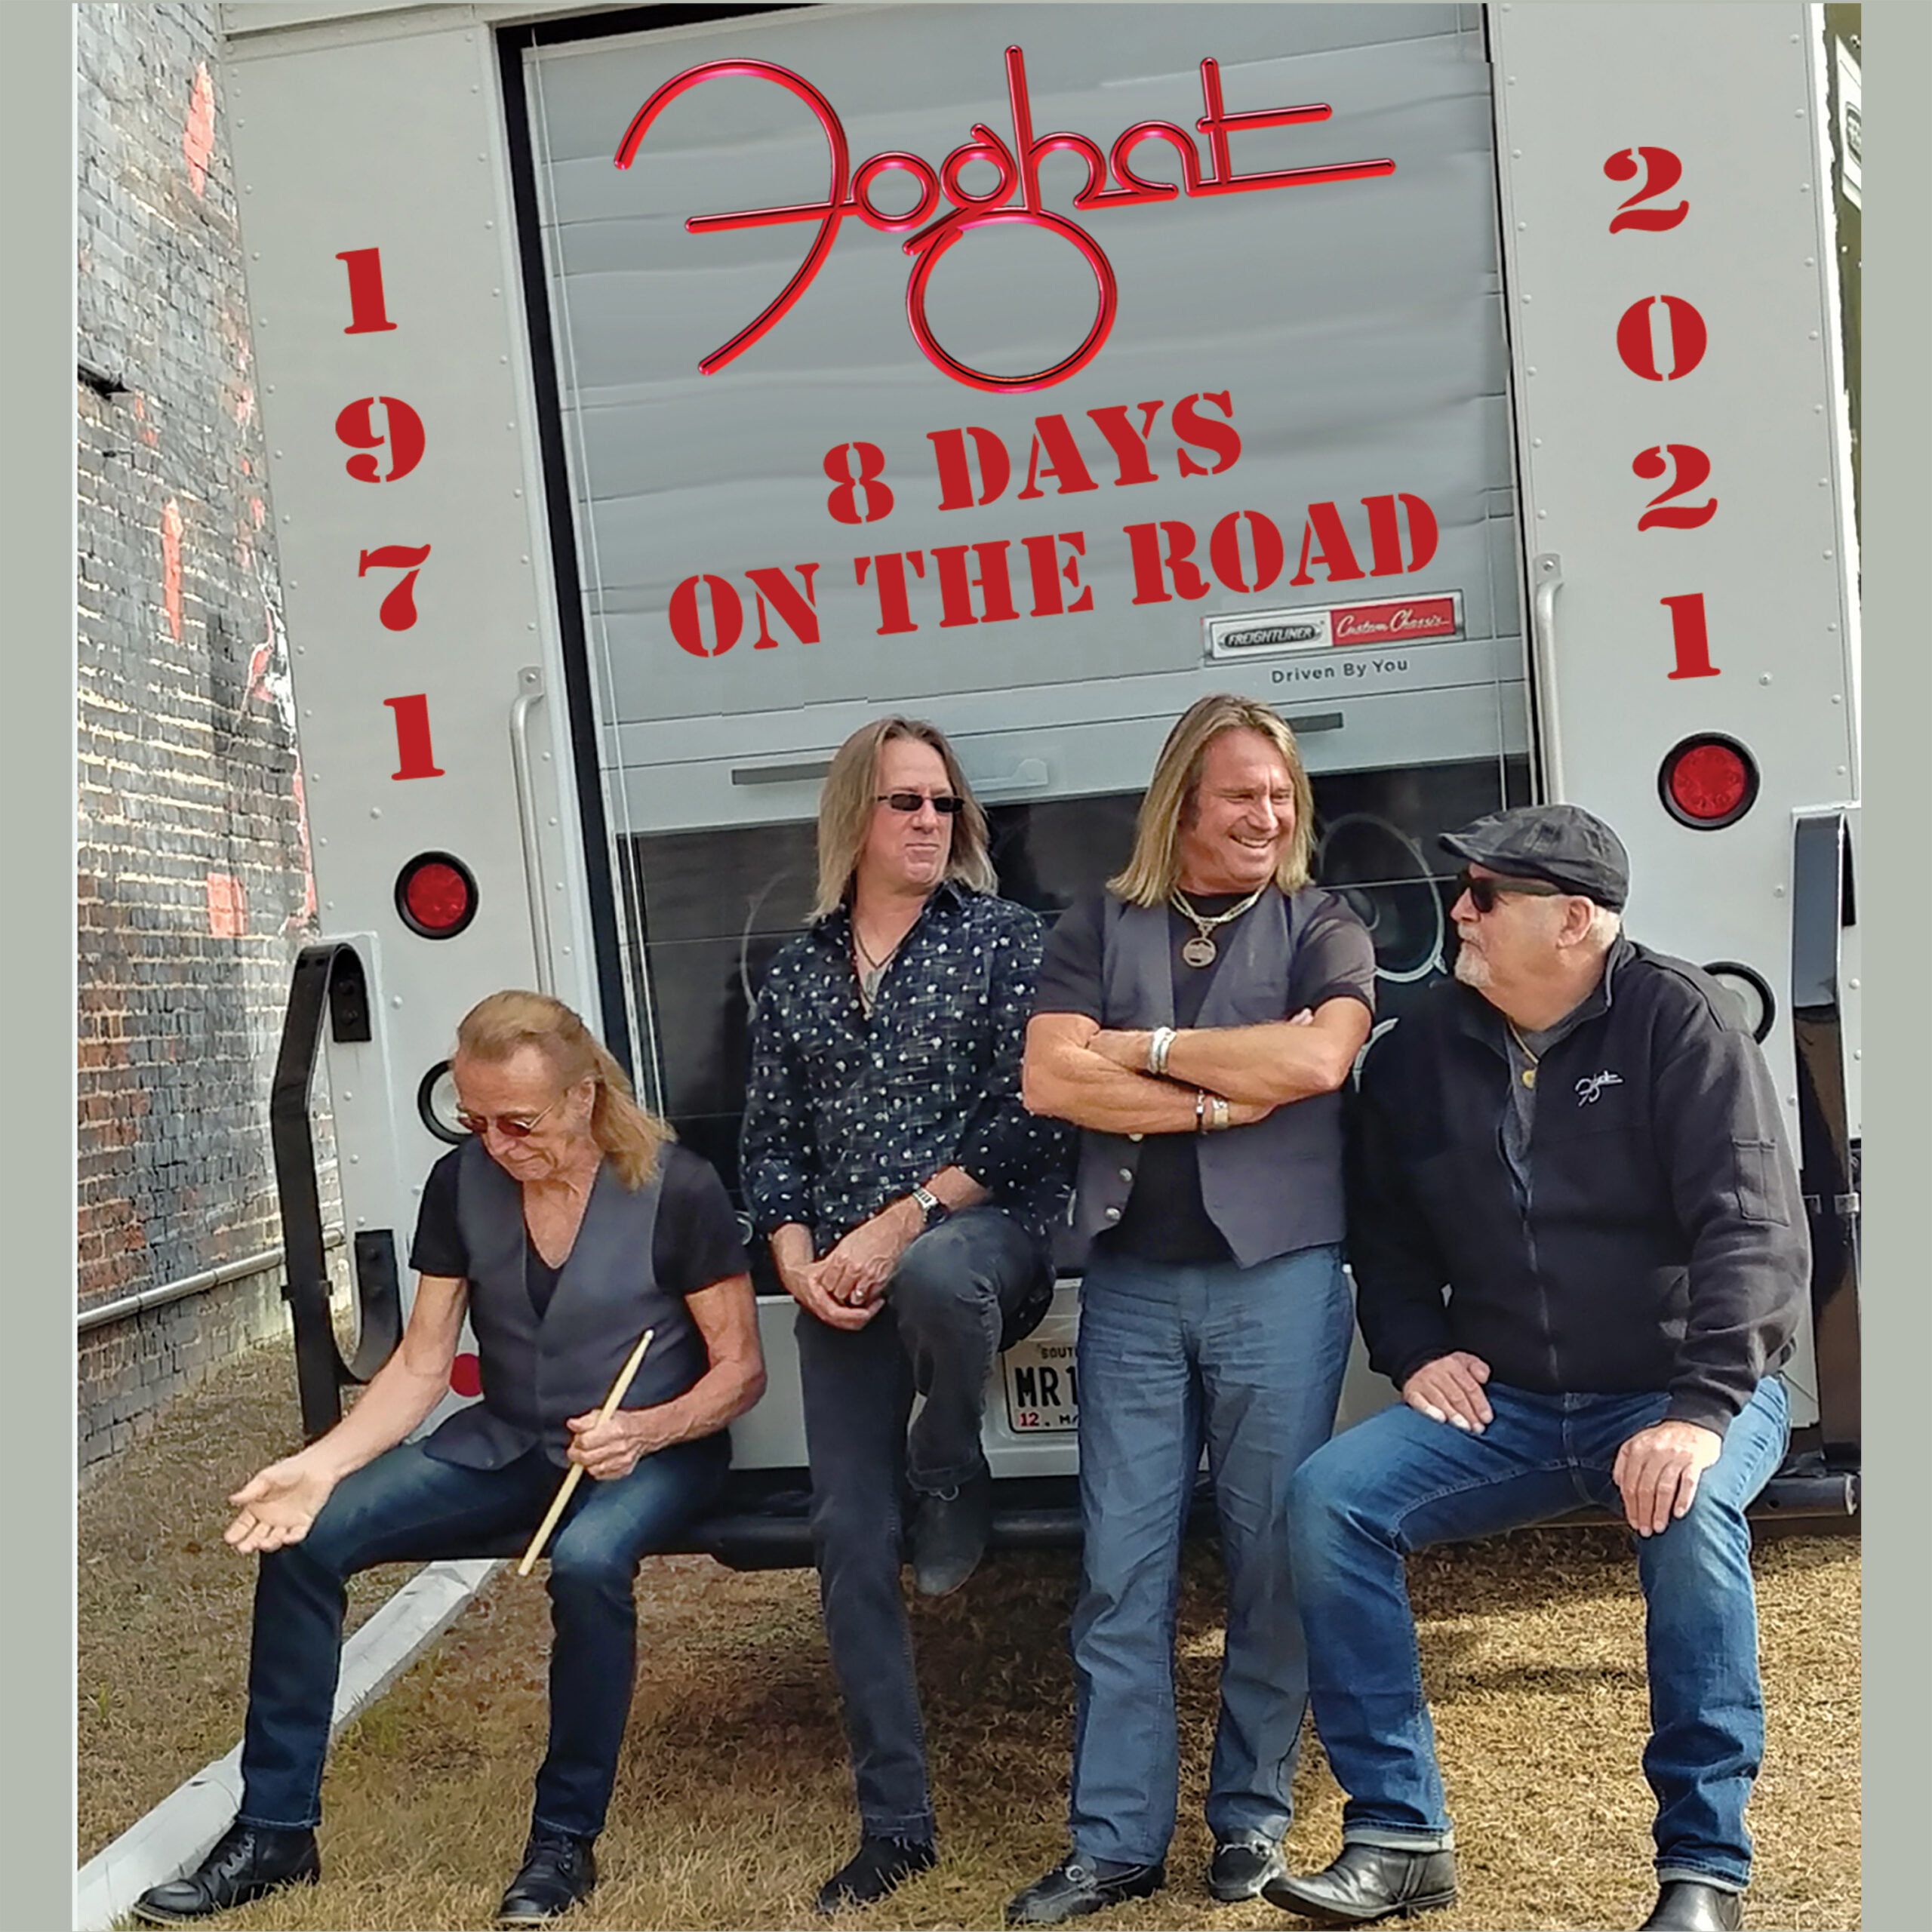 Foghat (UK) – 8 Days On The Road